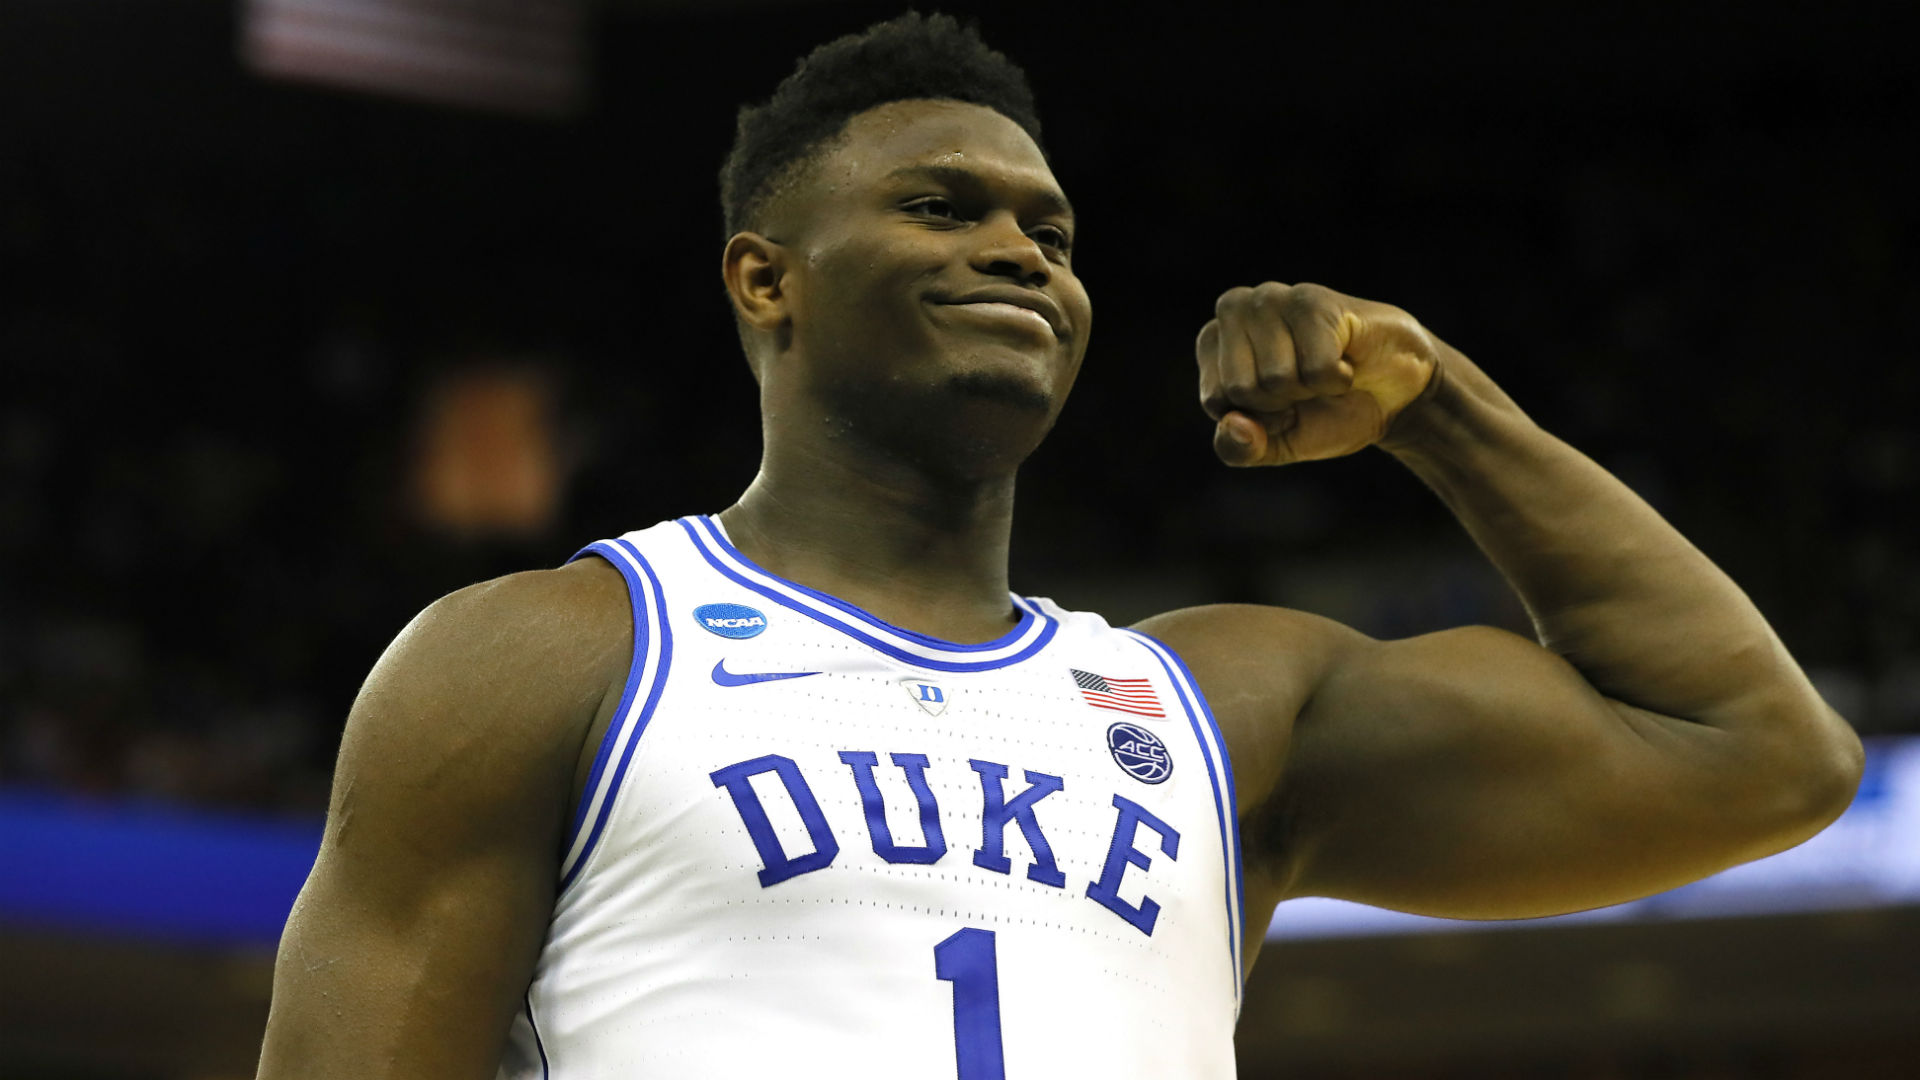 The prospect of joining an elite group of players as the number one pick in the NBA Draft will not distract Zion Williamson this week.